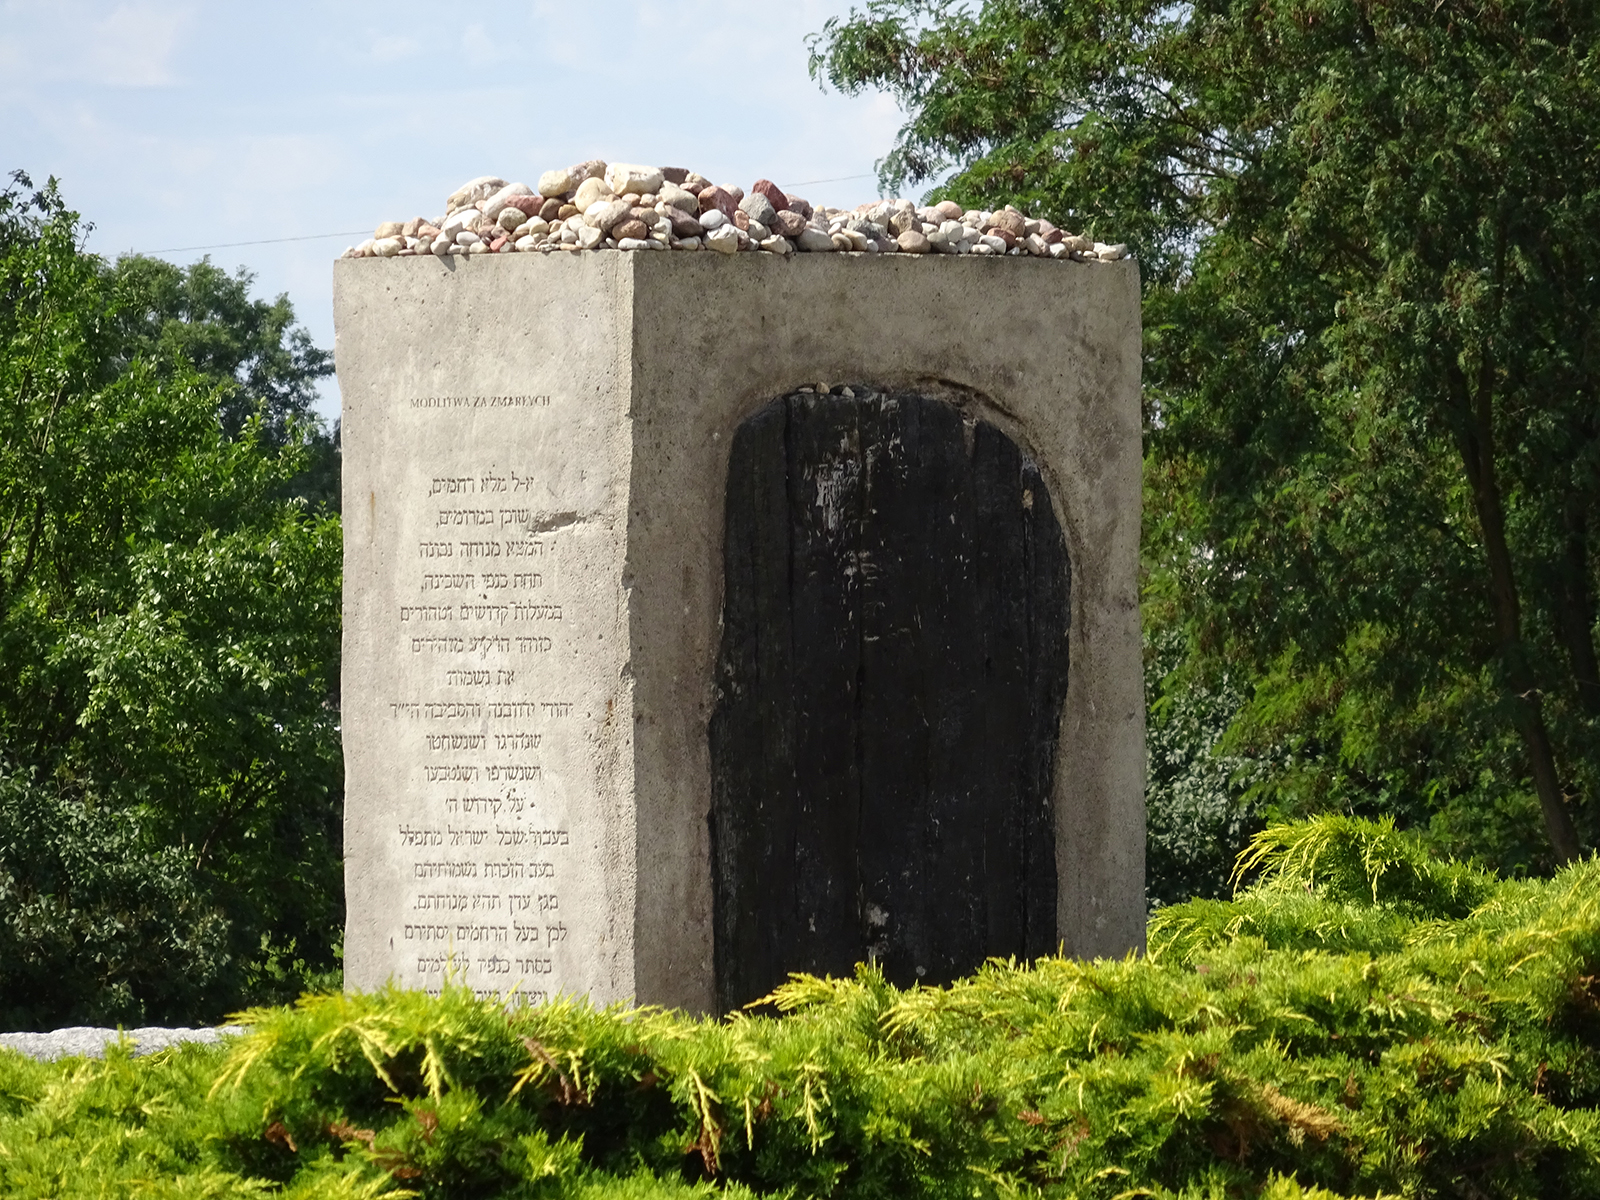 Memorial in Jedwabne, Poland, for the 1941 pogrom. Photo by Sylwester Górski/Wikipedia/Creative Commons